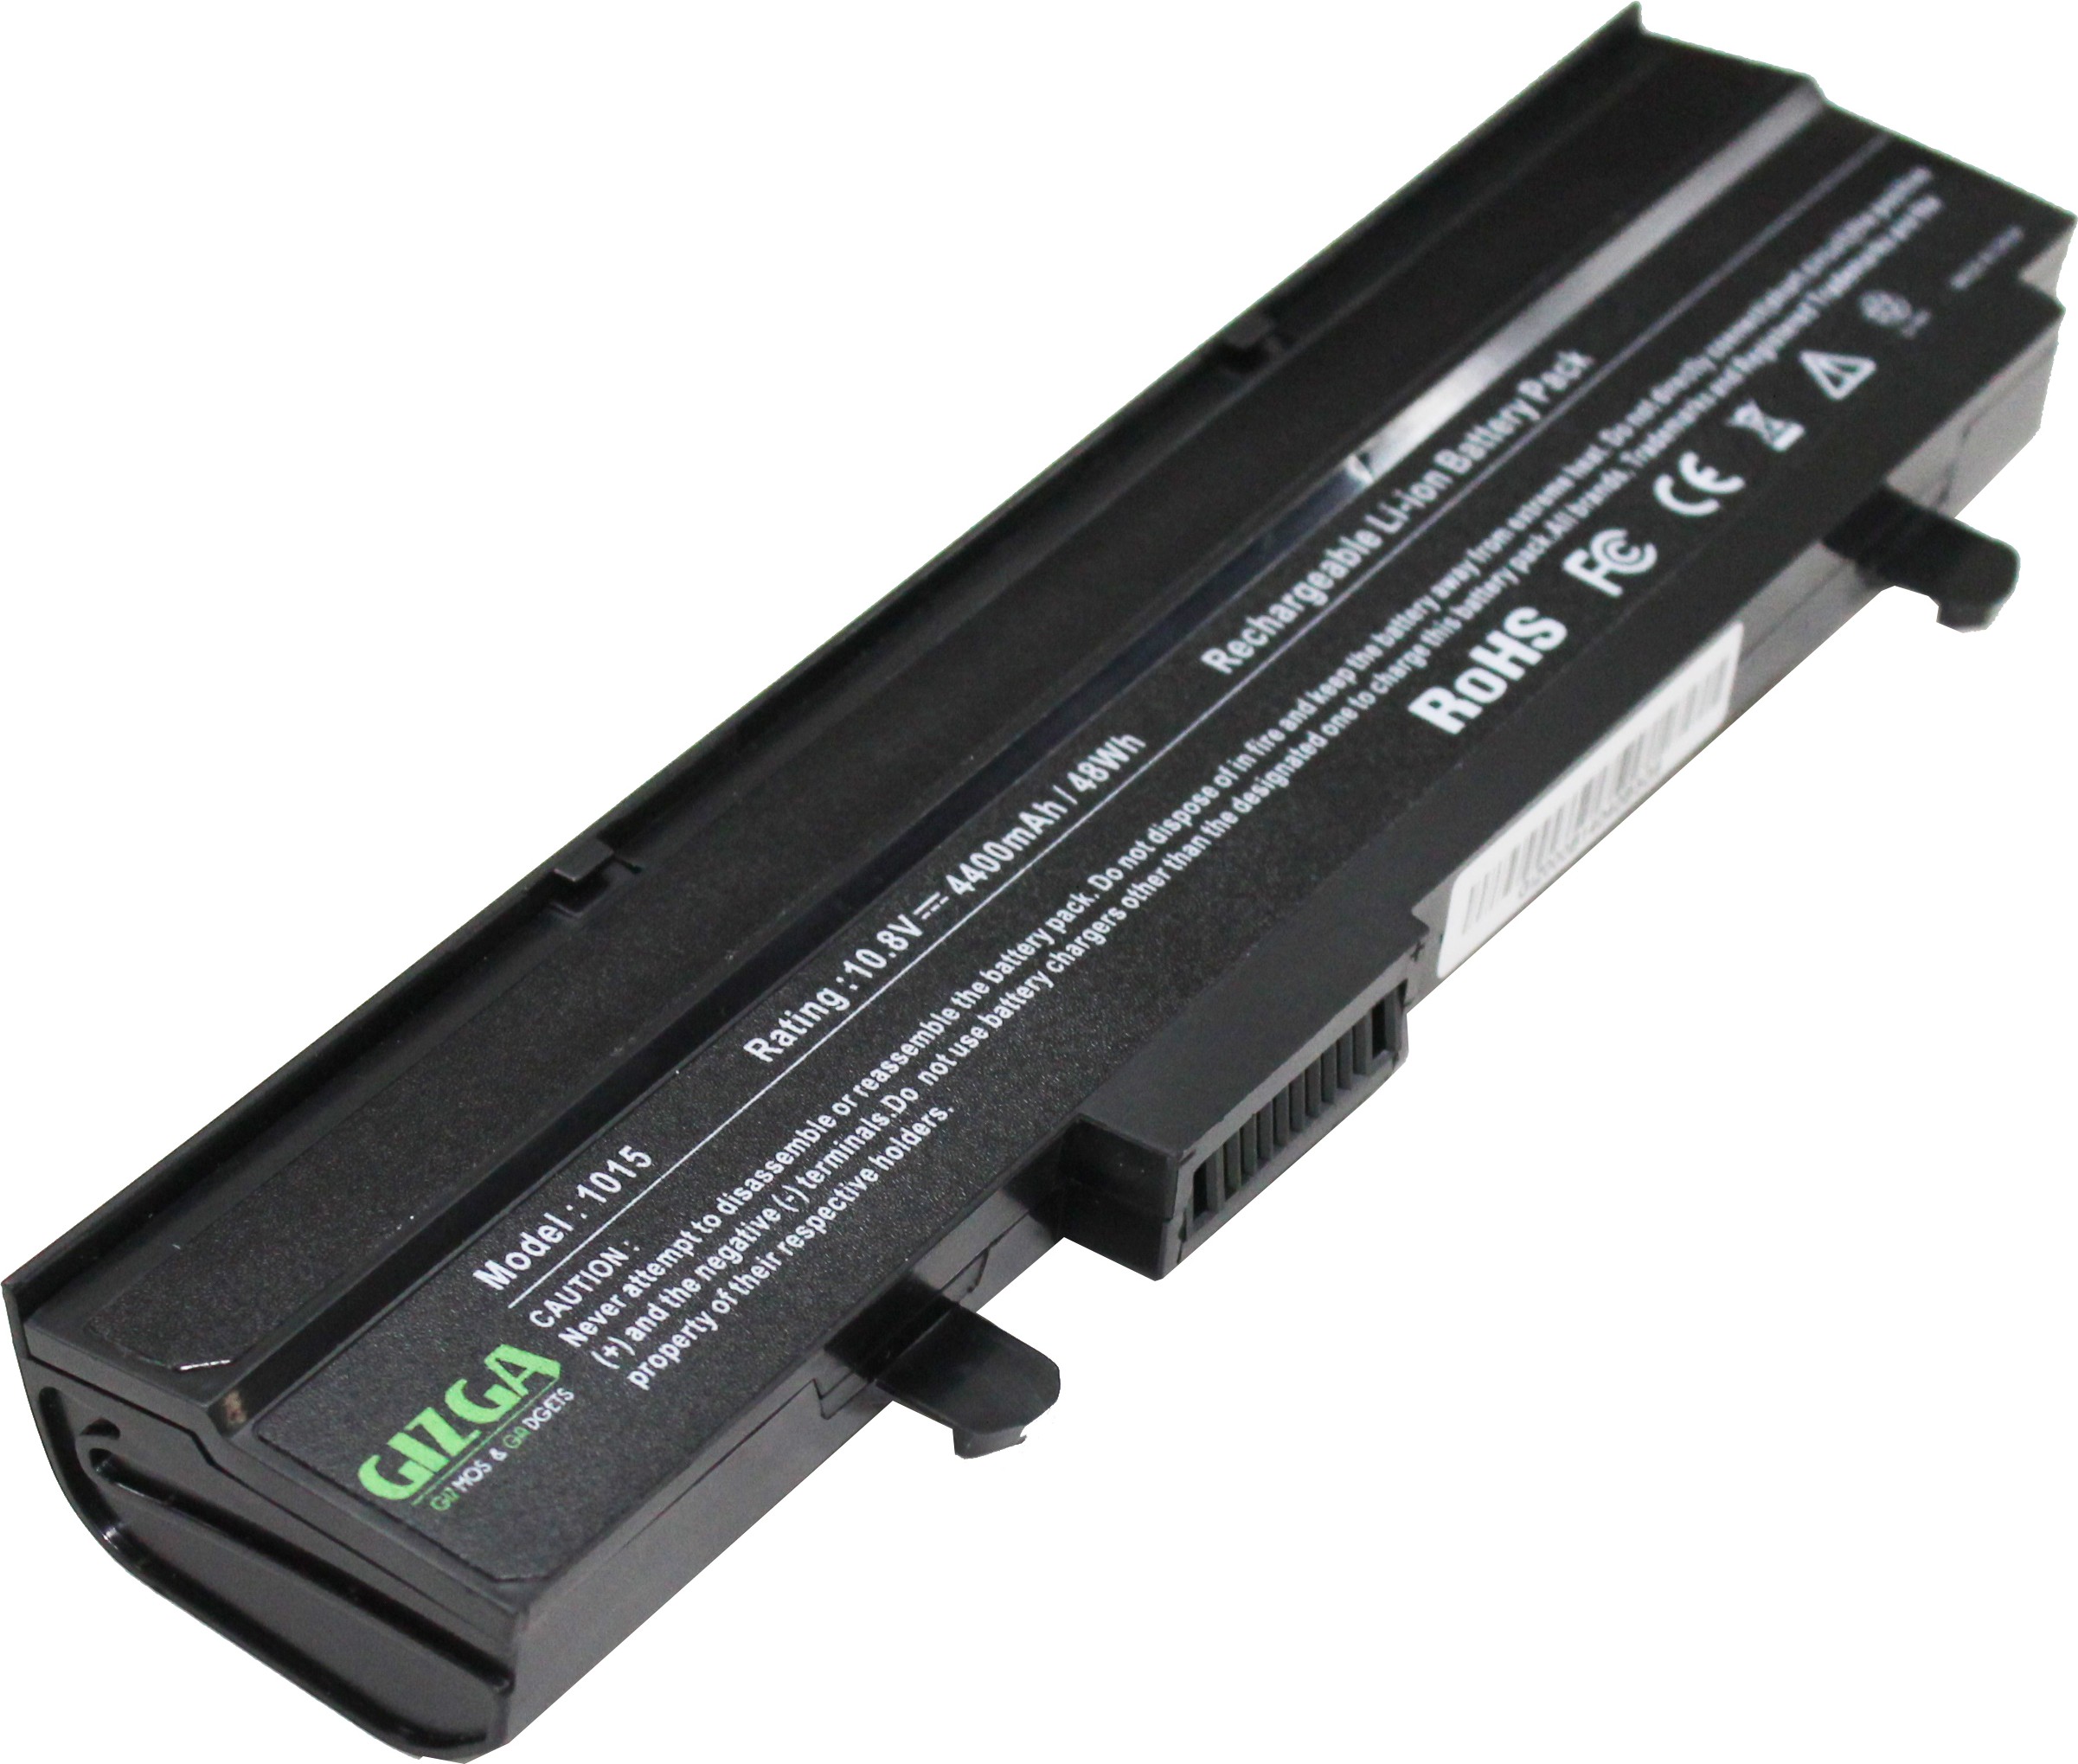 Asus battery pack a32. ASUS a32-1015. ASUS a32 аккумулятор. Аккумуляторная батарея ASUS a22-700 Eee PC 700. PS 1010 ASUS аккумулятор.